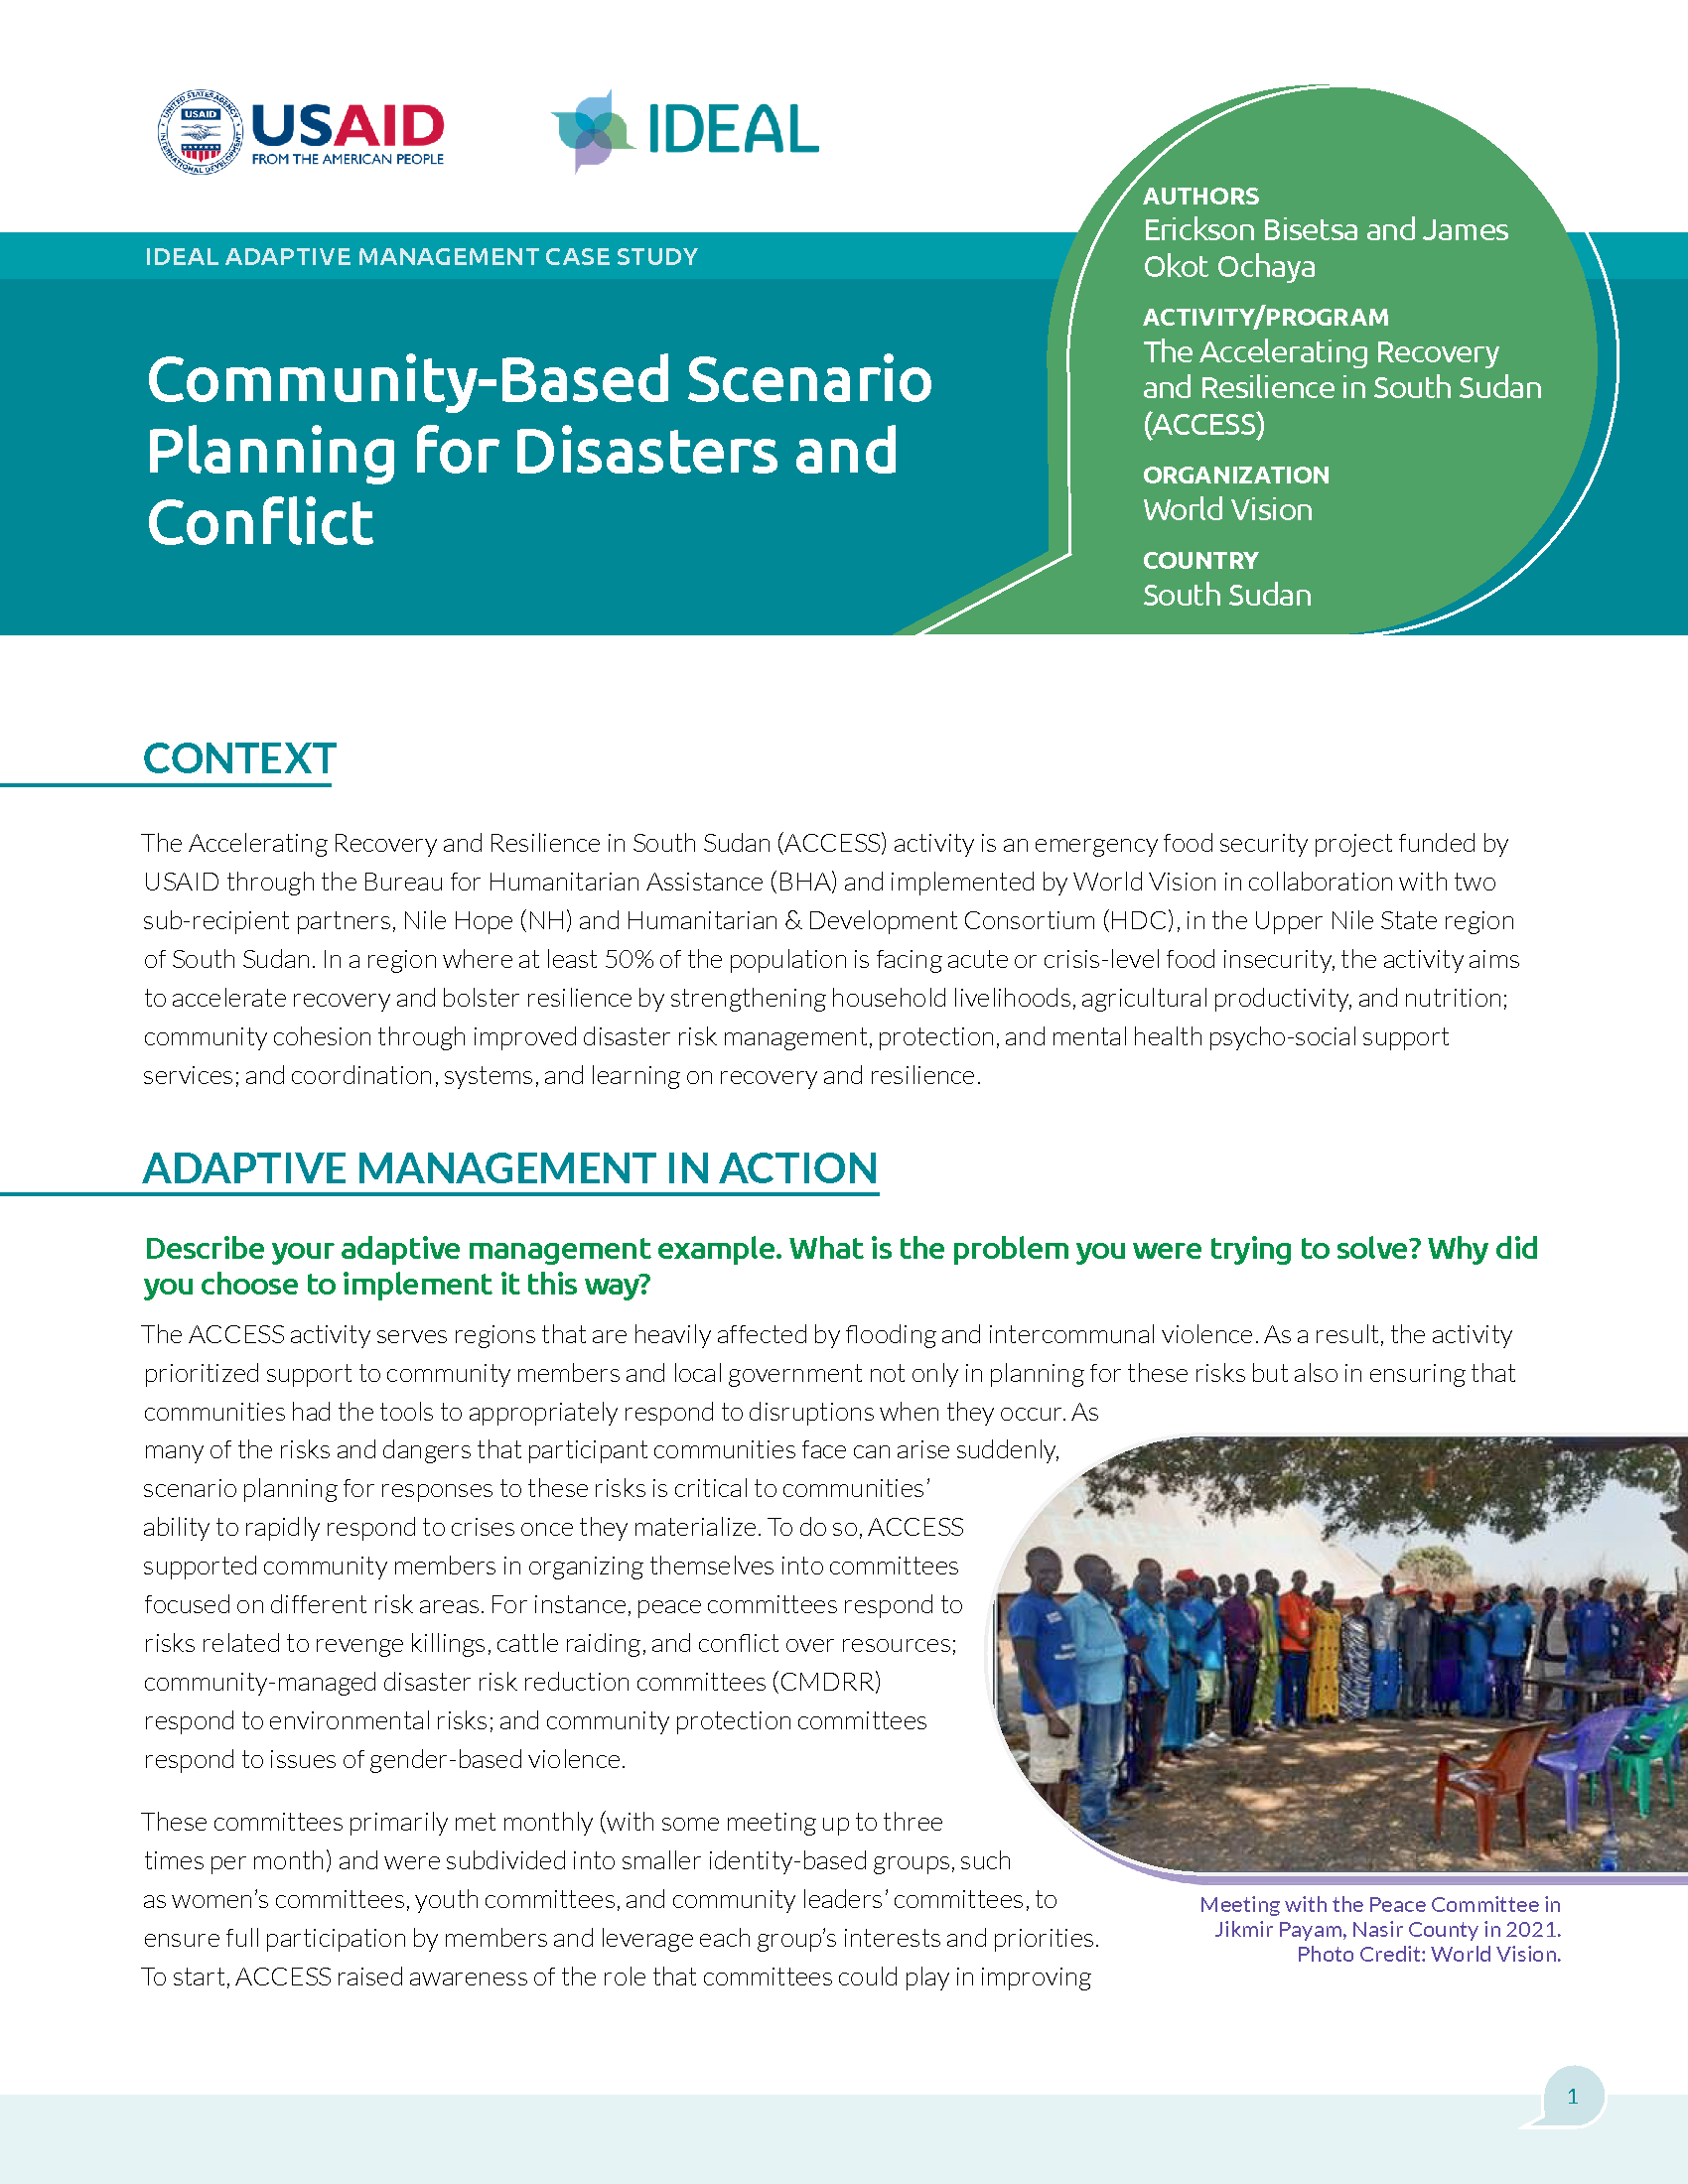 Cover page for Community-Based Scenario Planning for Disasters and Conflict